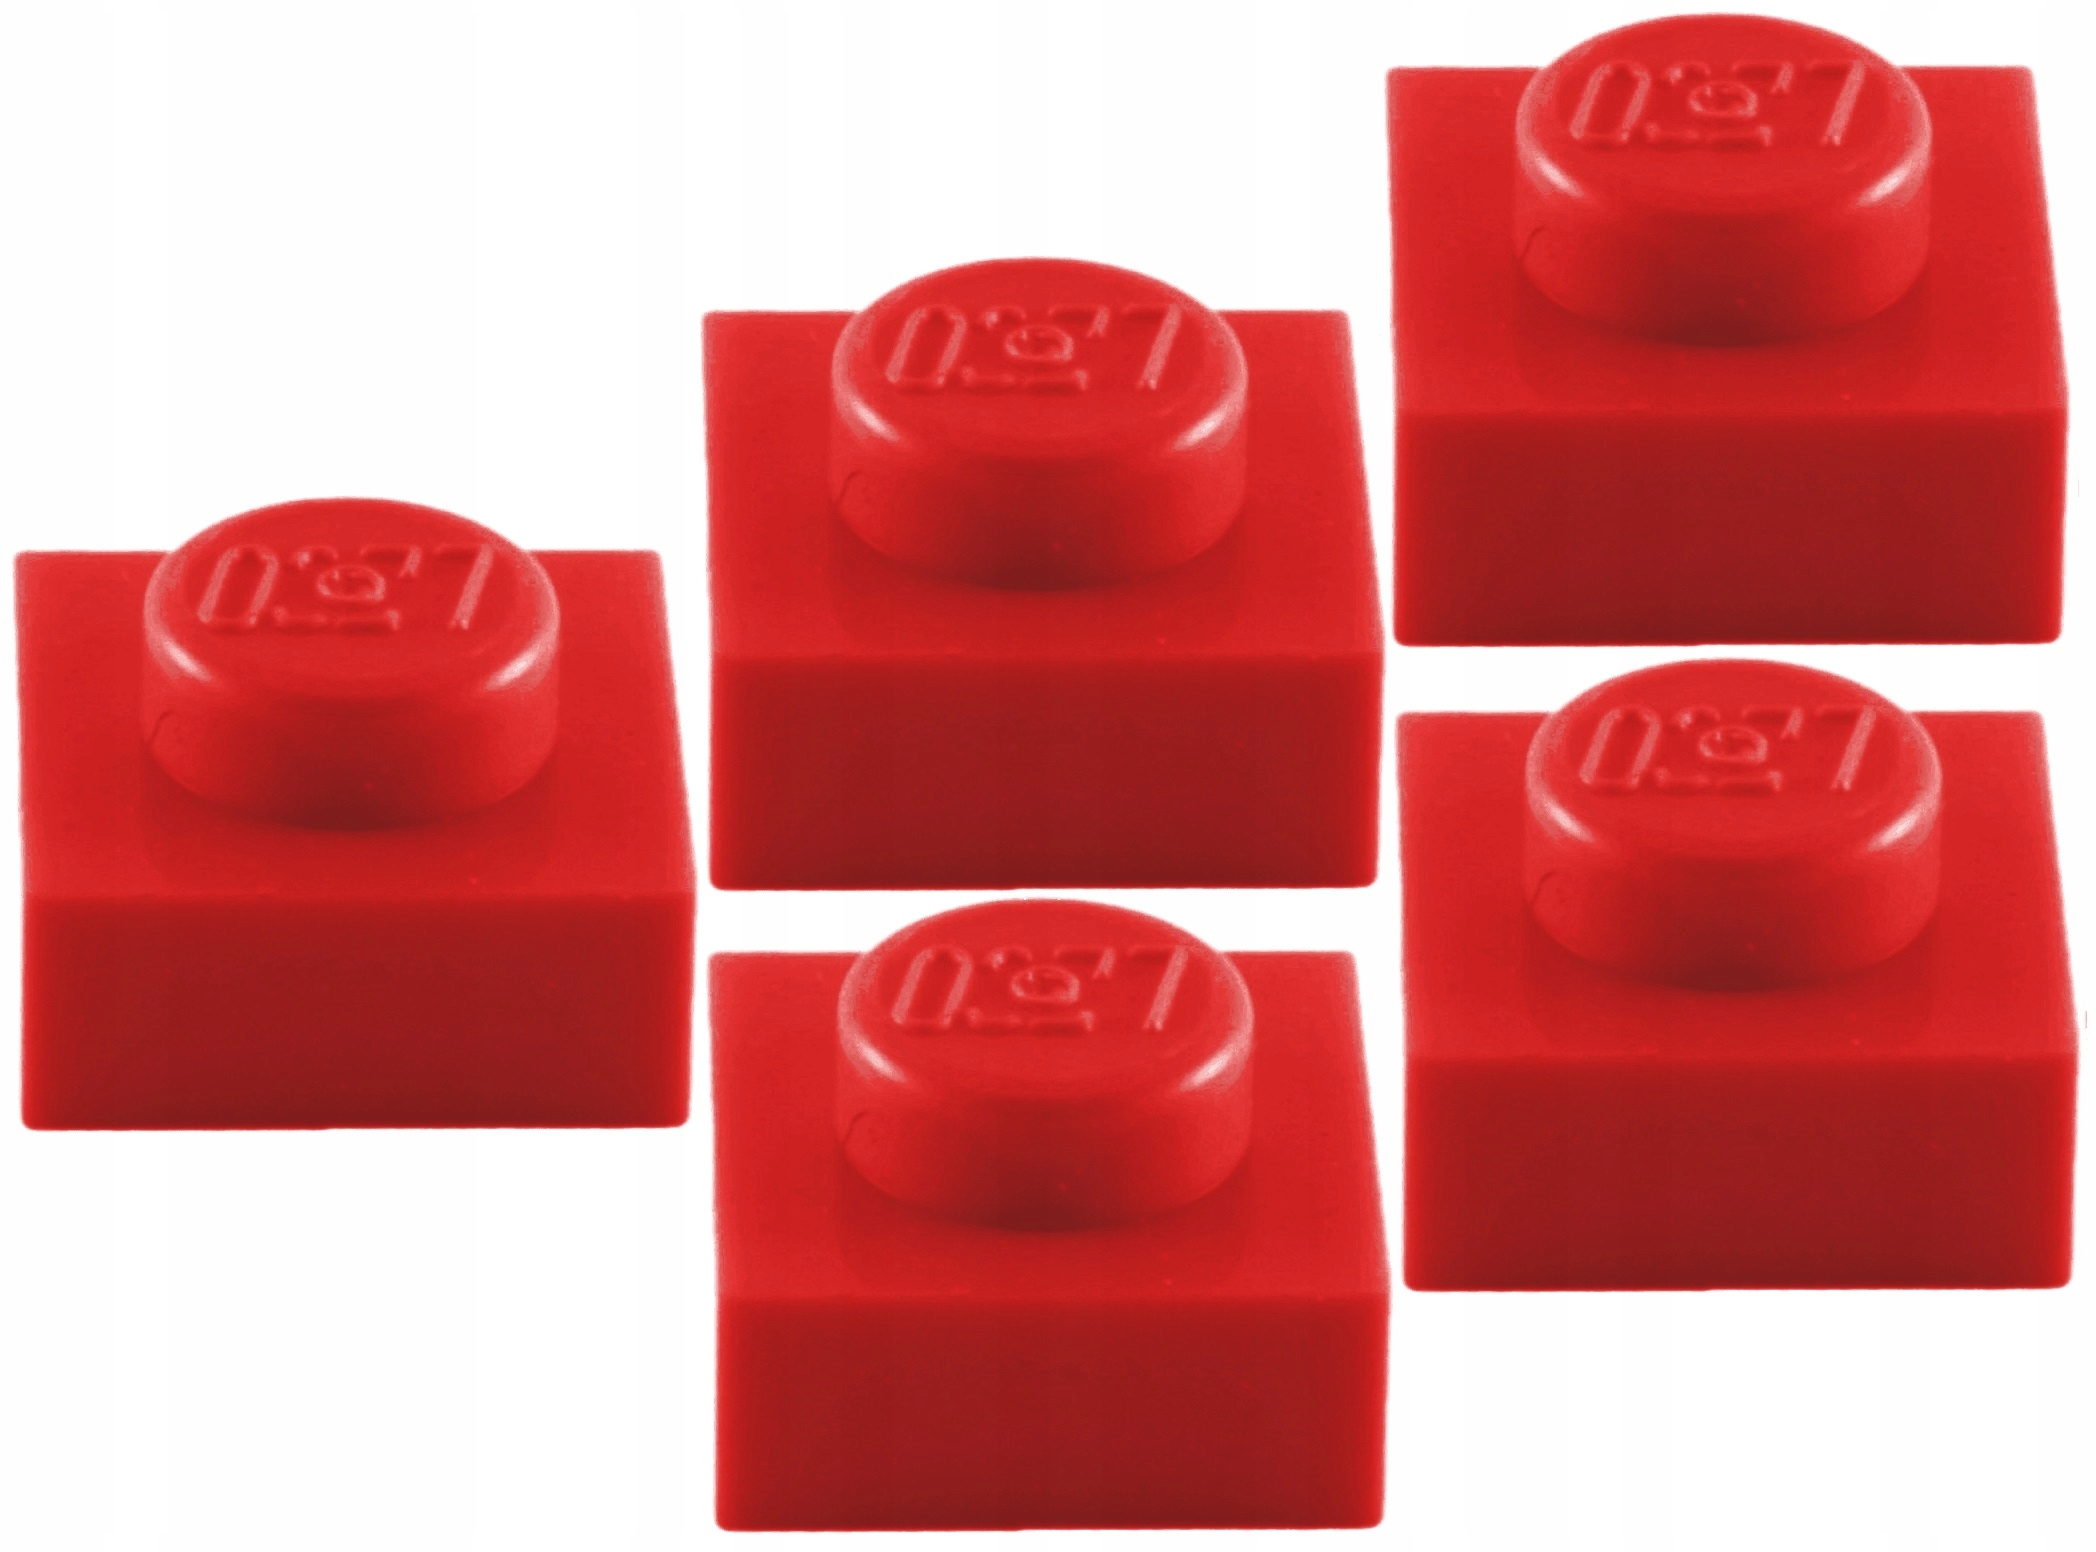 "Red" 1x1 Plates 3024/302421 100 NEW LEGO Bright Red 